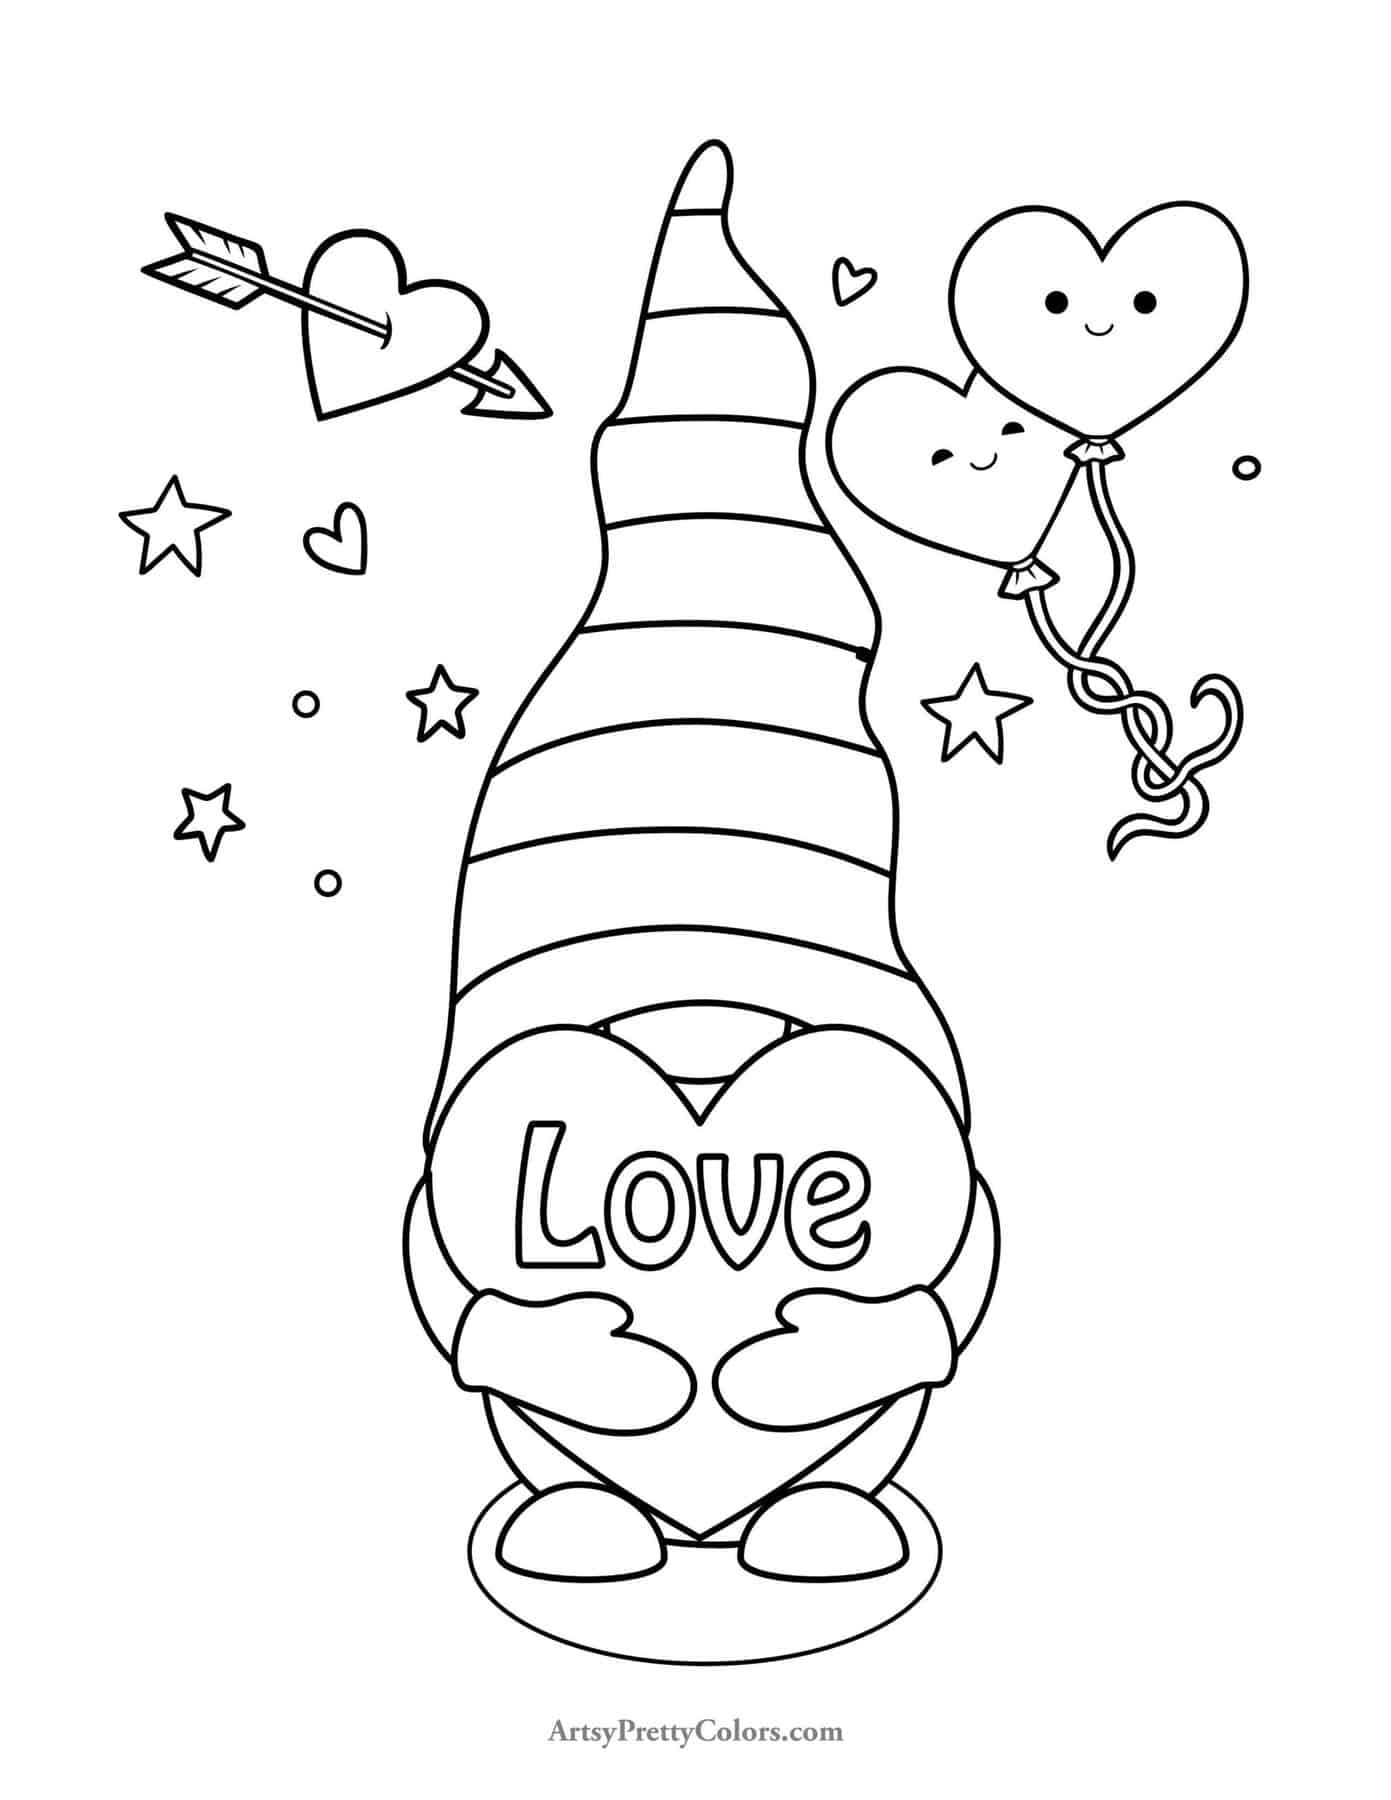 60 Valentine's Day Coloring Pages for Free - Artsy Pretty Plants